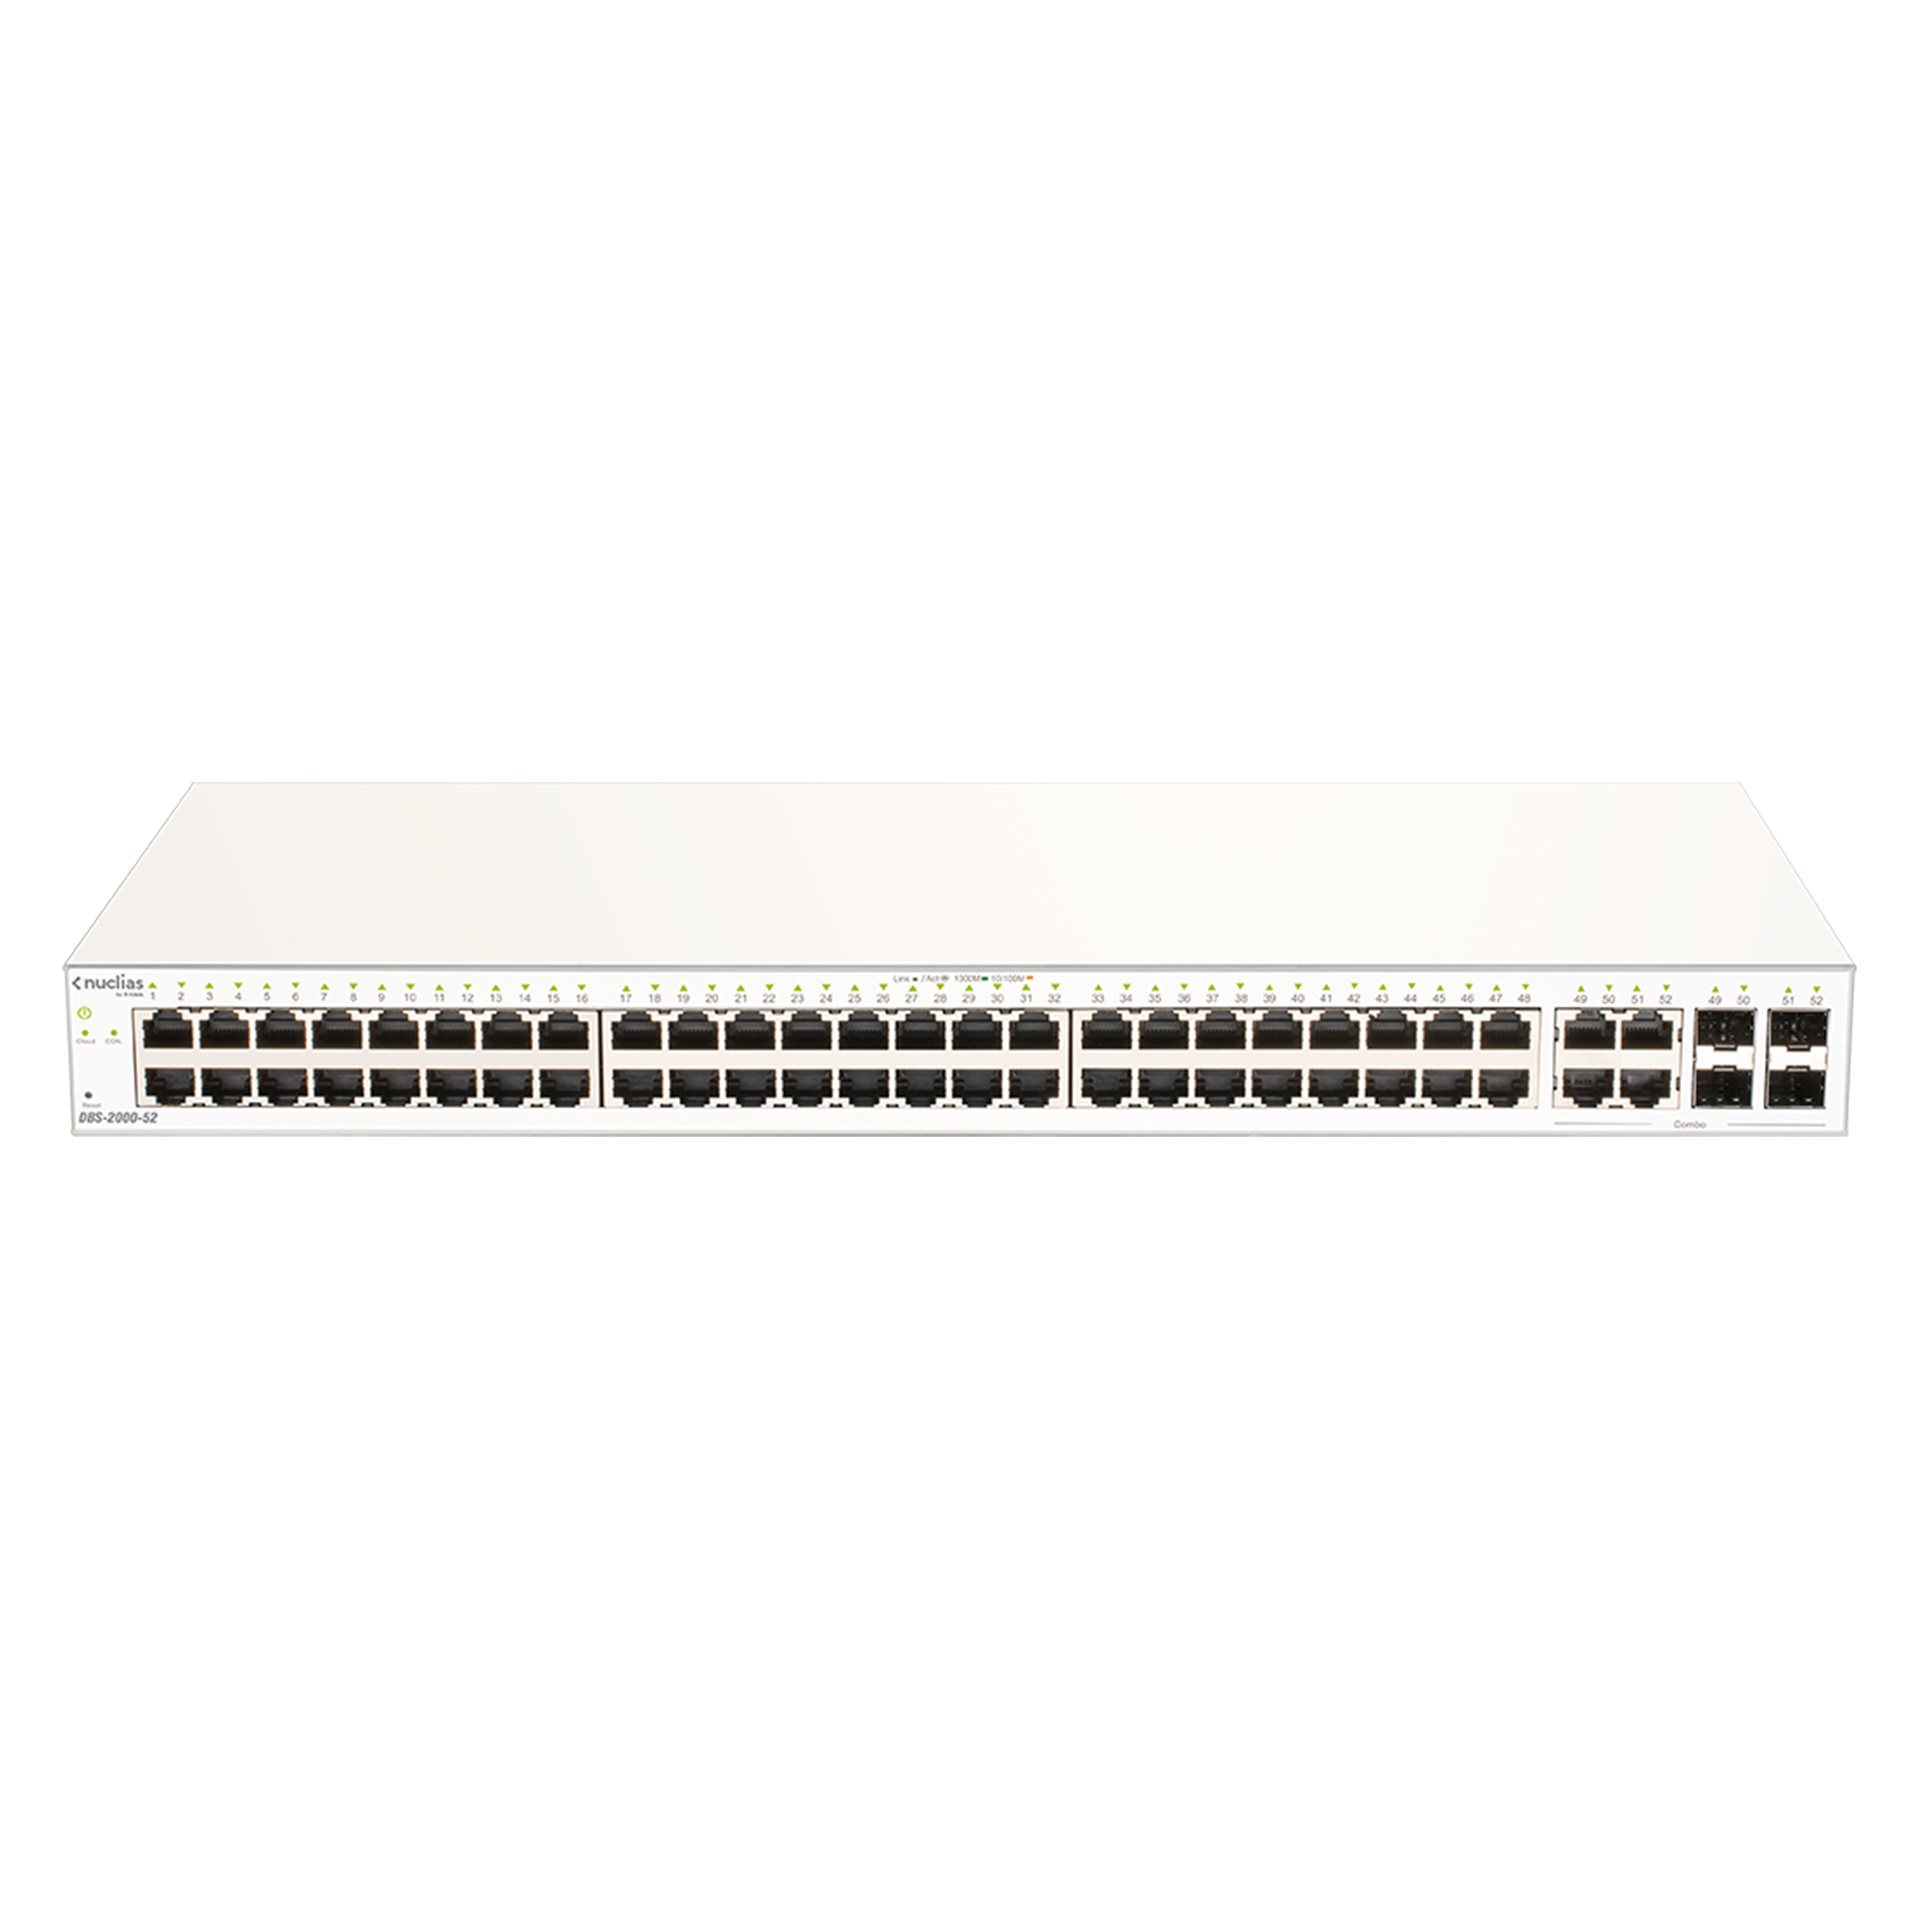   Switch ethernet   Nuclias Switch 48 Ports Giga + 4 Combo SFP DBS-2000-52